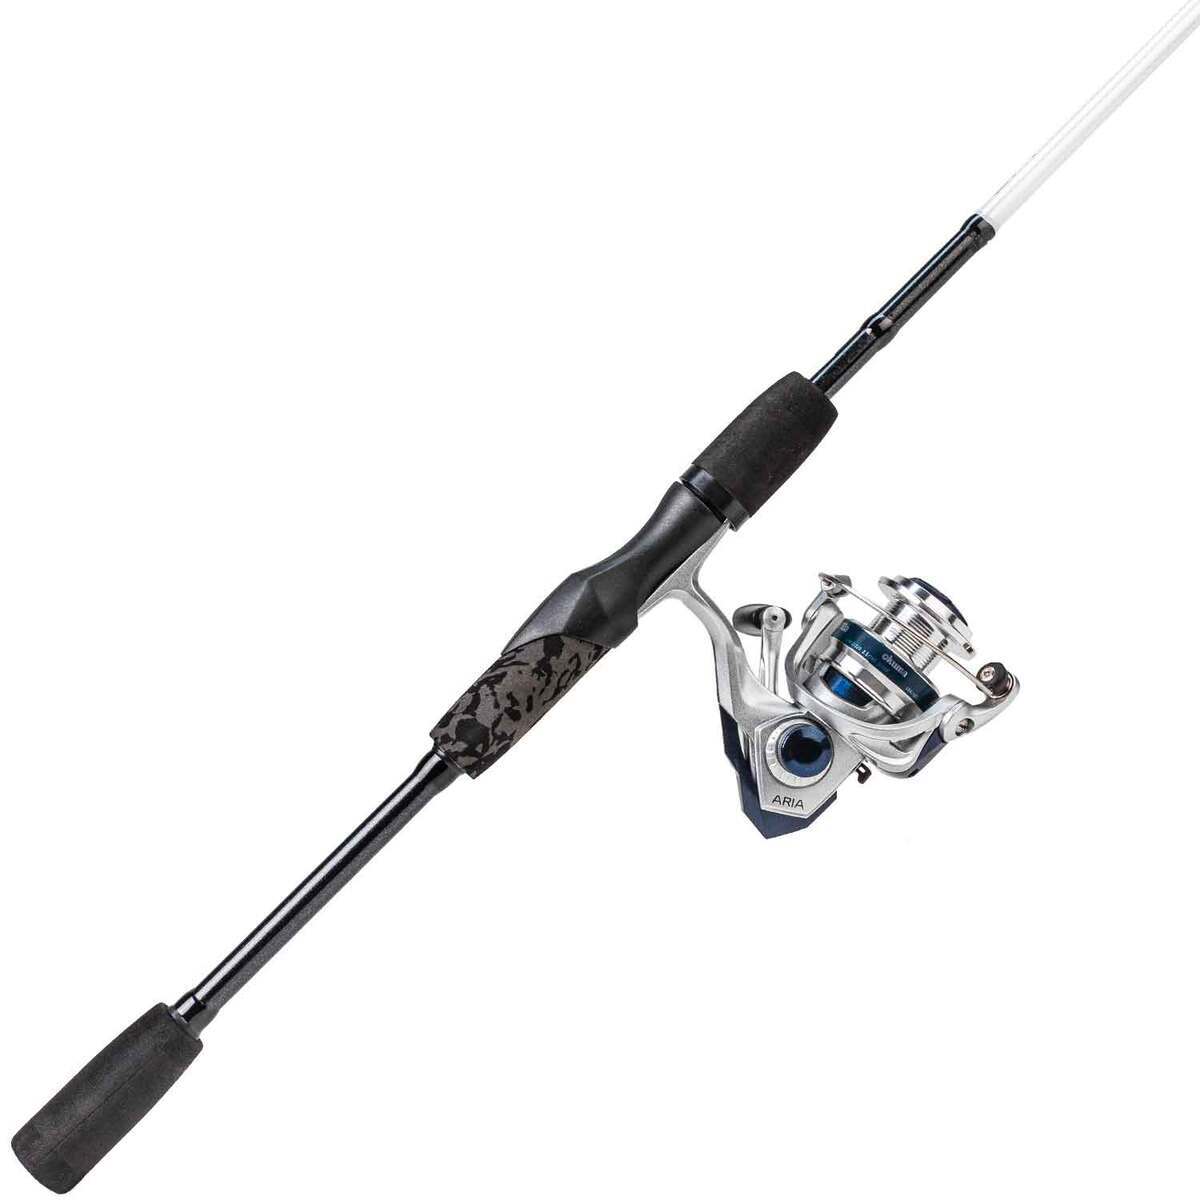 2.1m2.7m Rod Reel Combos telescopic Spinning fishing rod Spinning Reels set  carbon 29cm Cork handle Pikes fish trout rods pesca